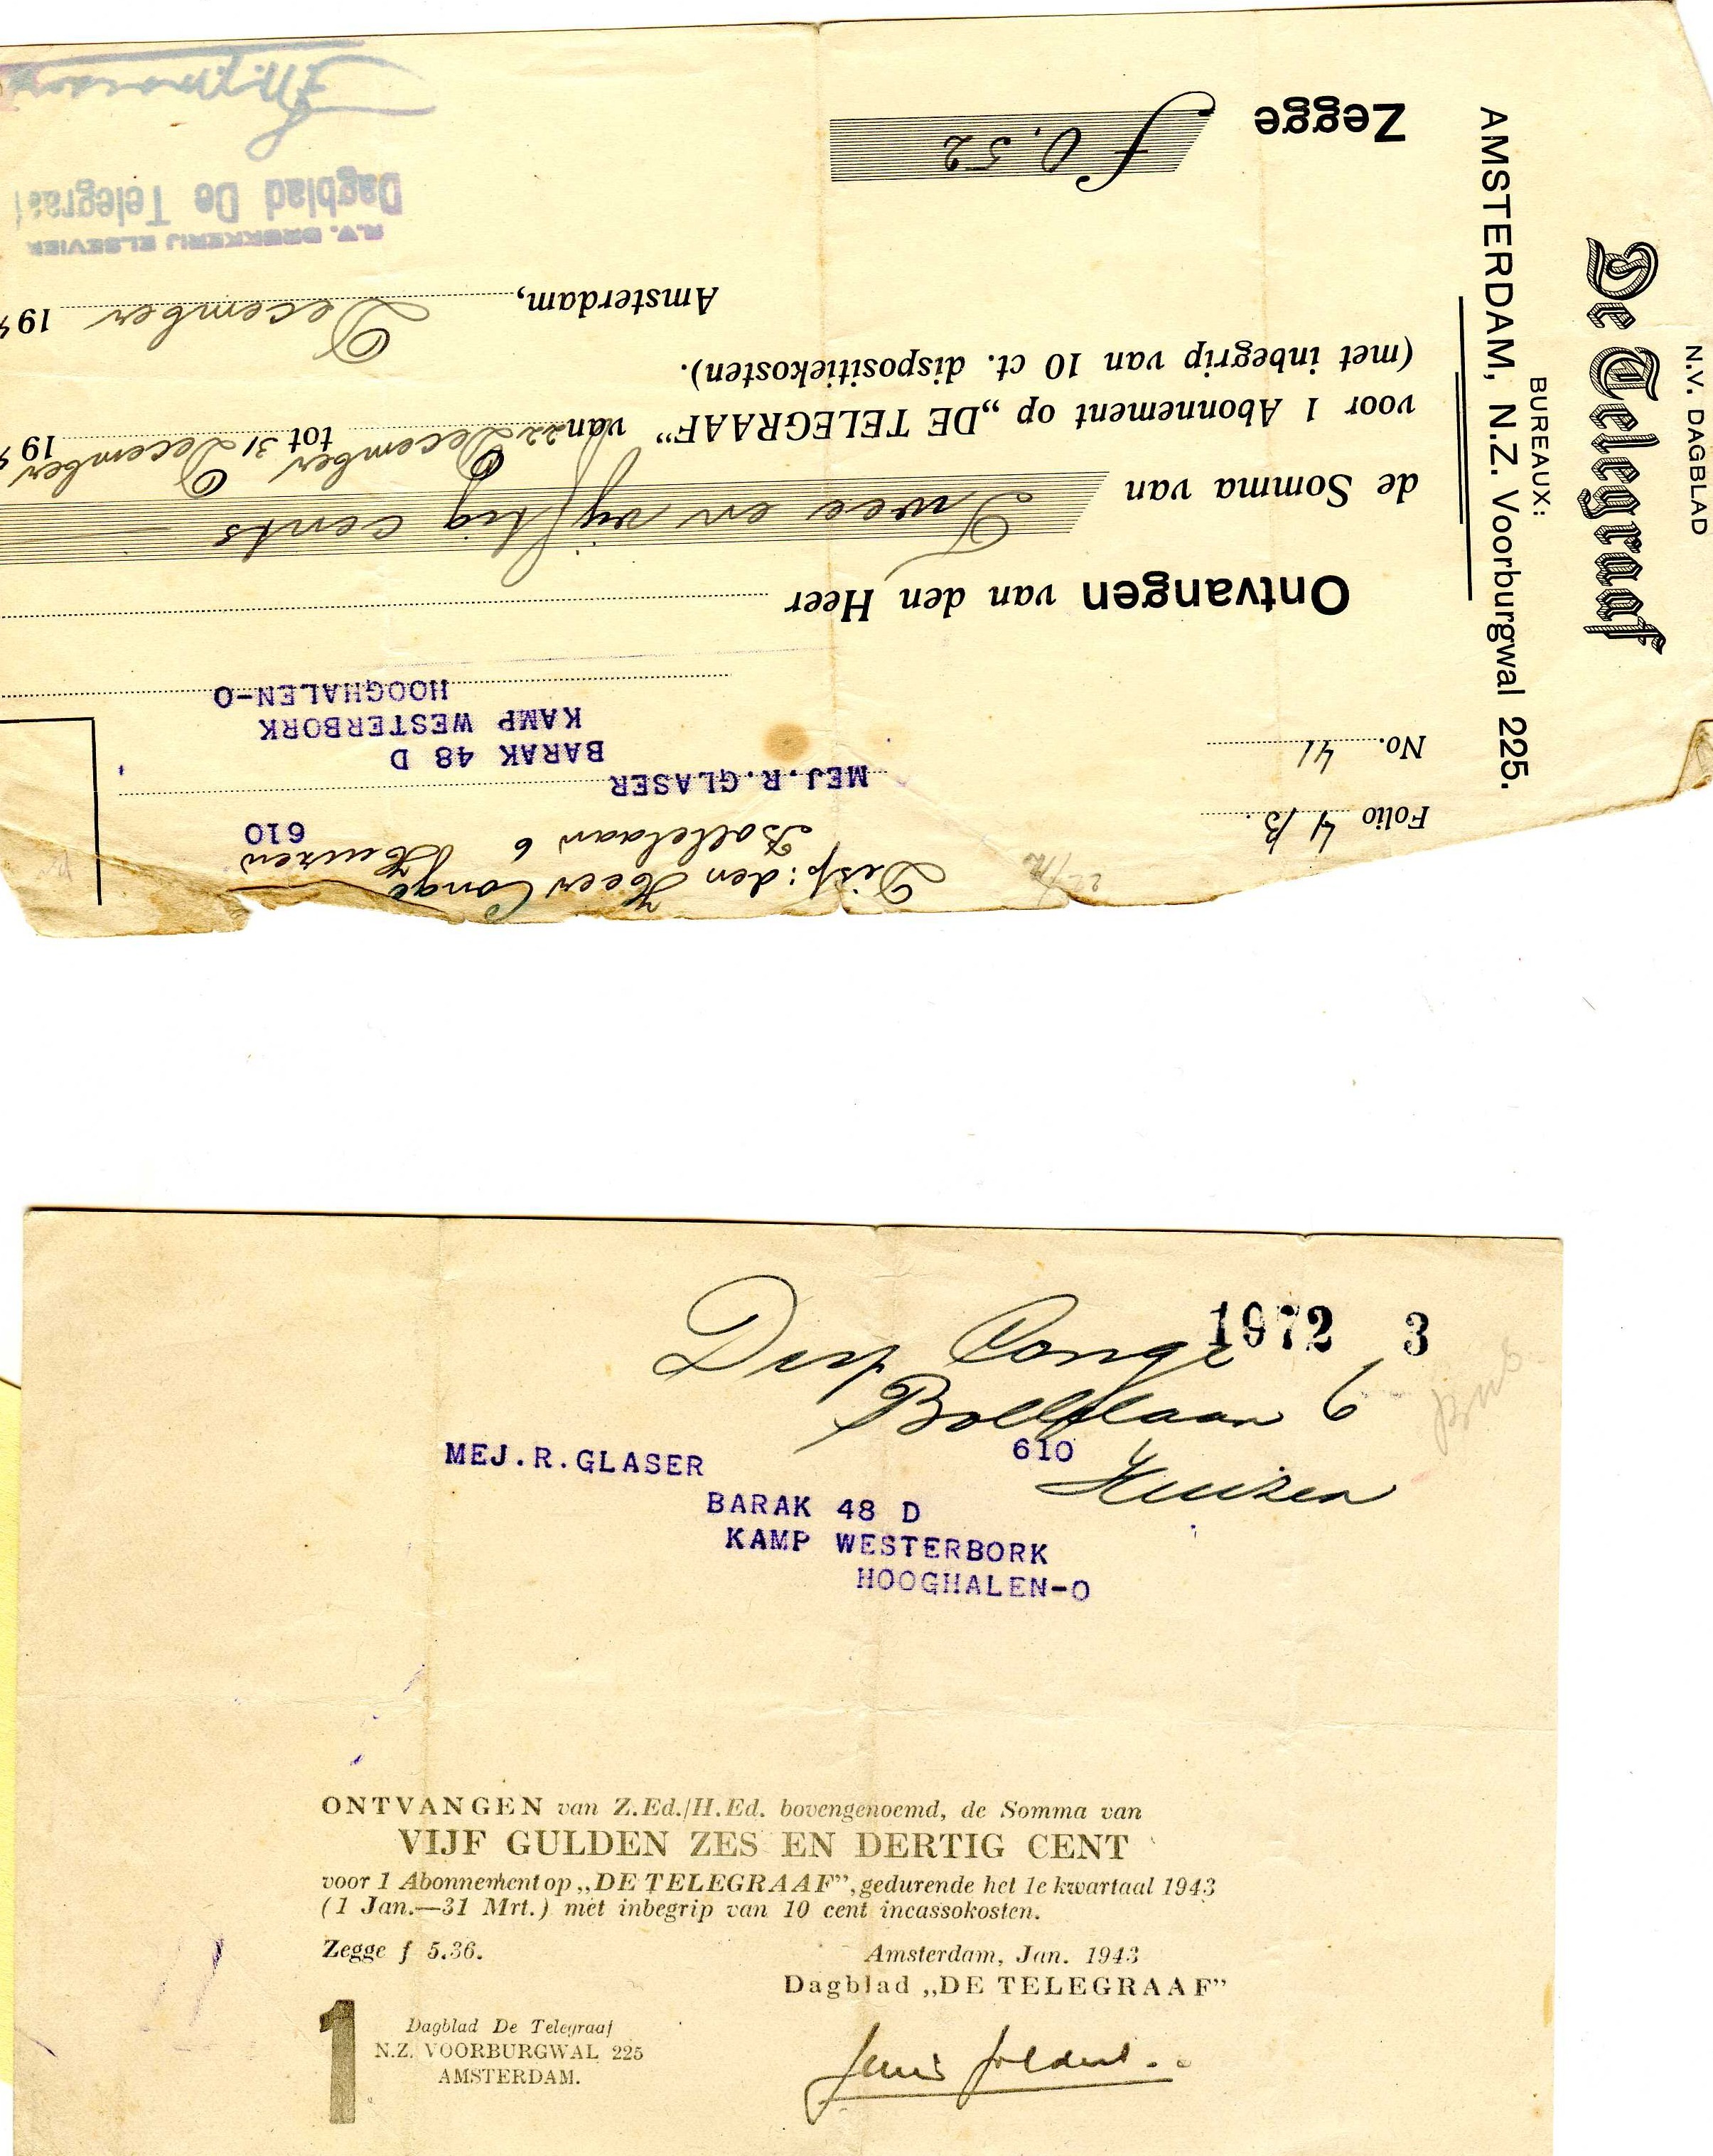 Payment by Aunt Rosie for newspaper Daily Telegraph in camp Westerbork
